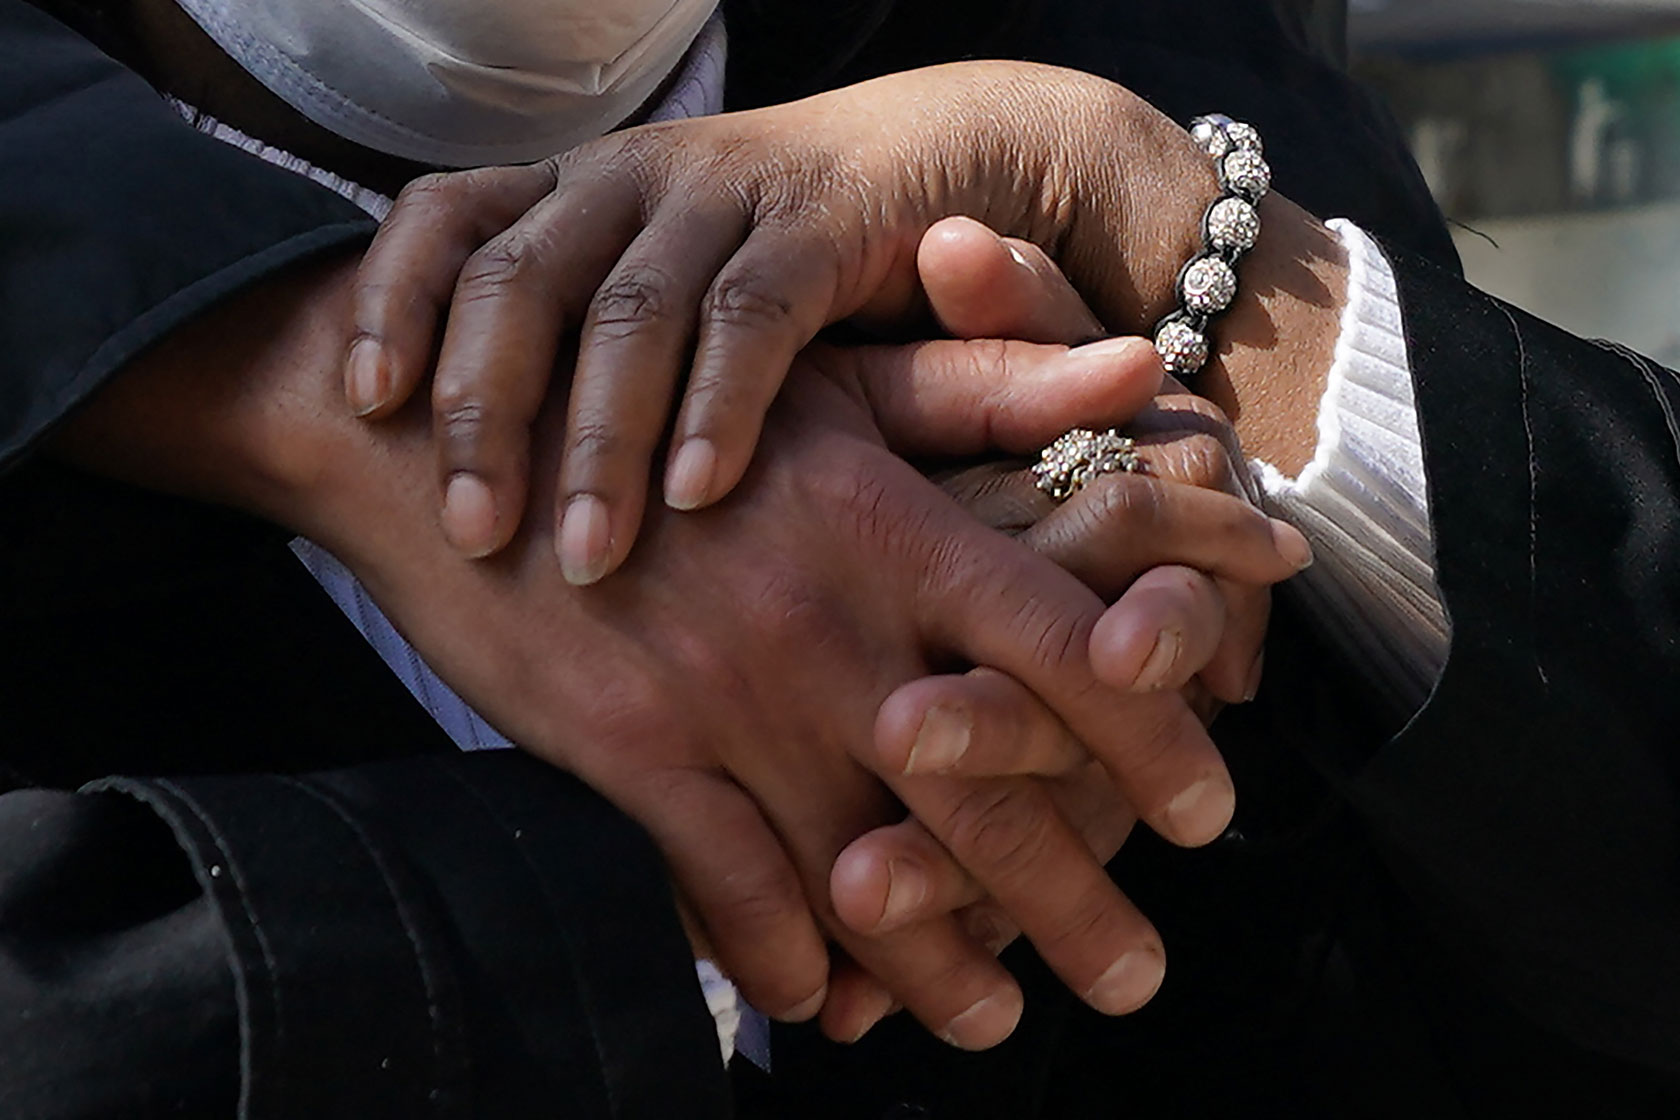 Yvette Nesbit and Lorenzo Laroc hold hands as they gather near the Cathedral of St. John the Divine in New York for a Service of Prayer and Witness Against Anti-Asian Violence on March 23, 2021.